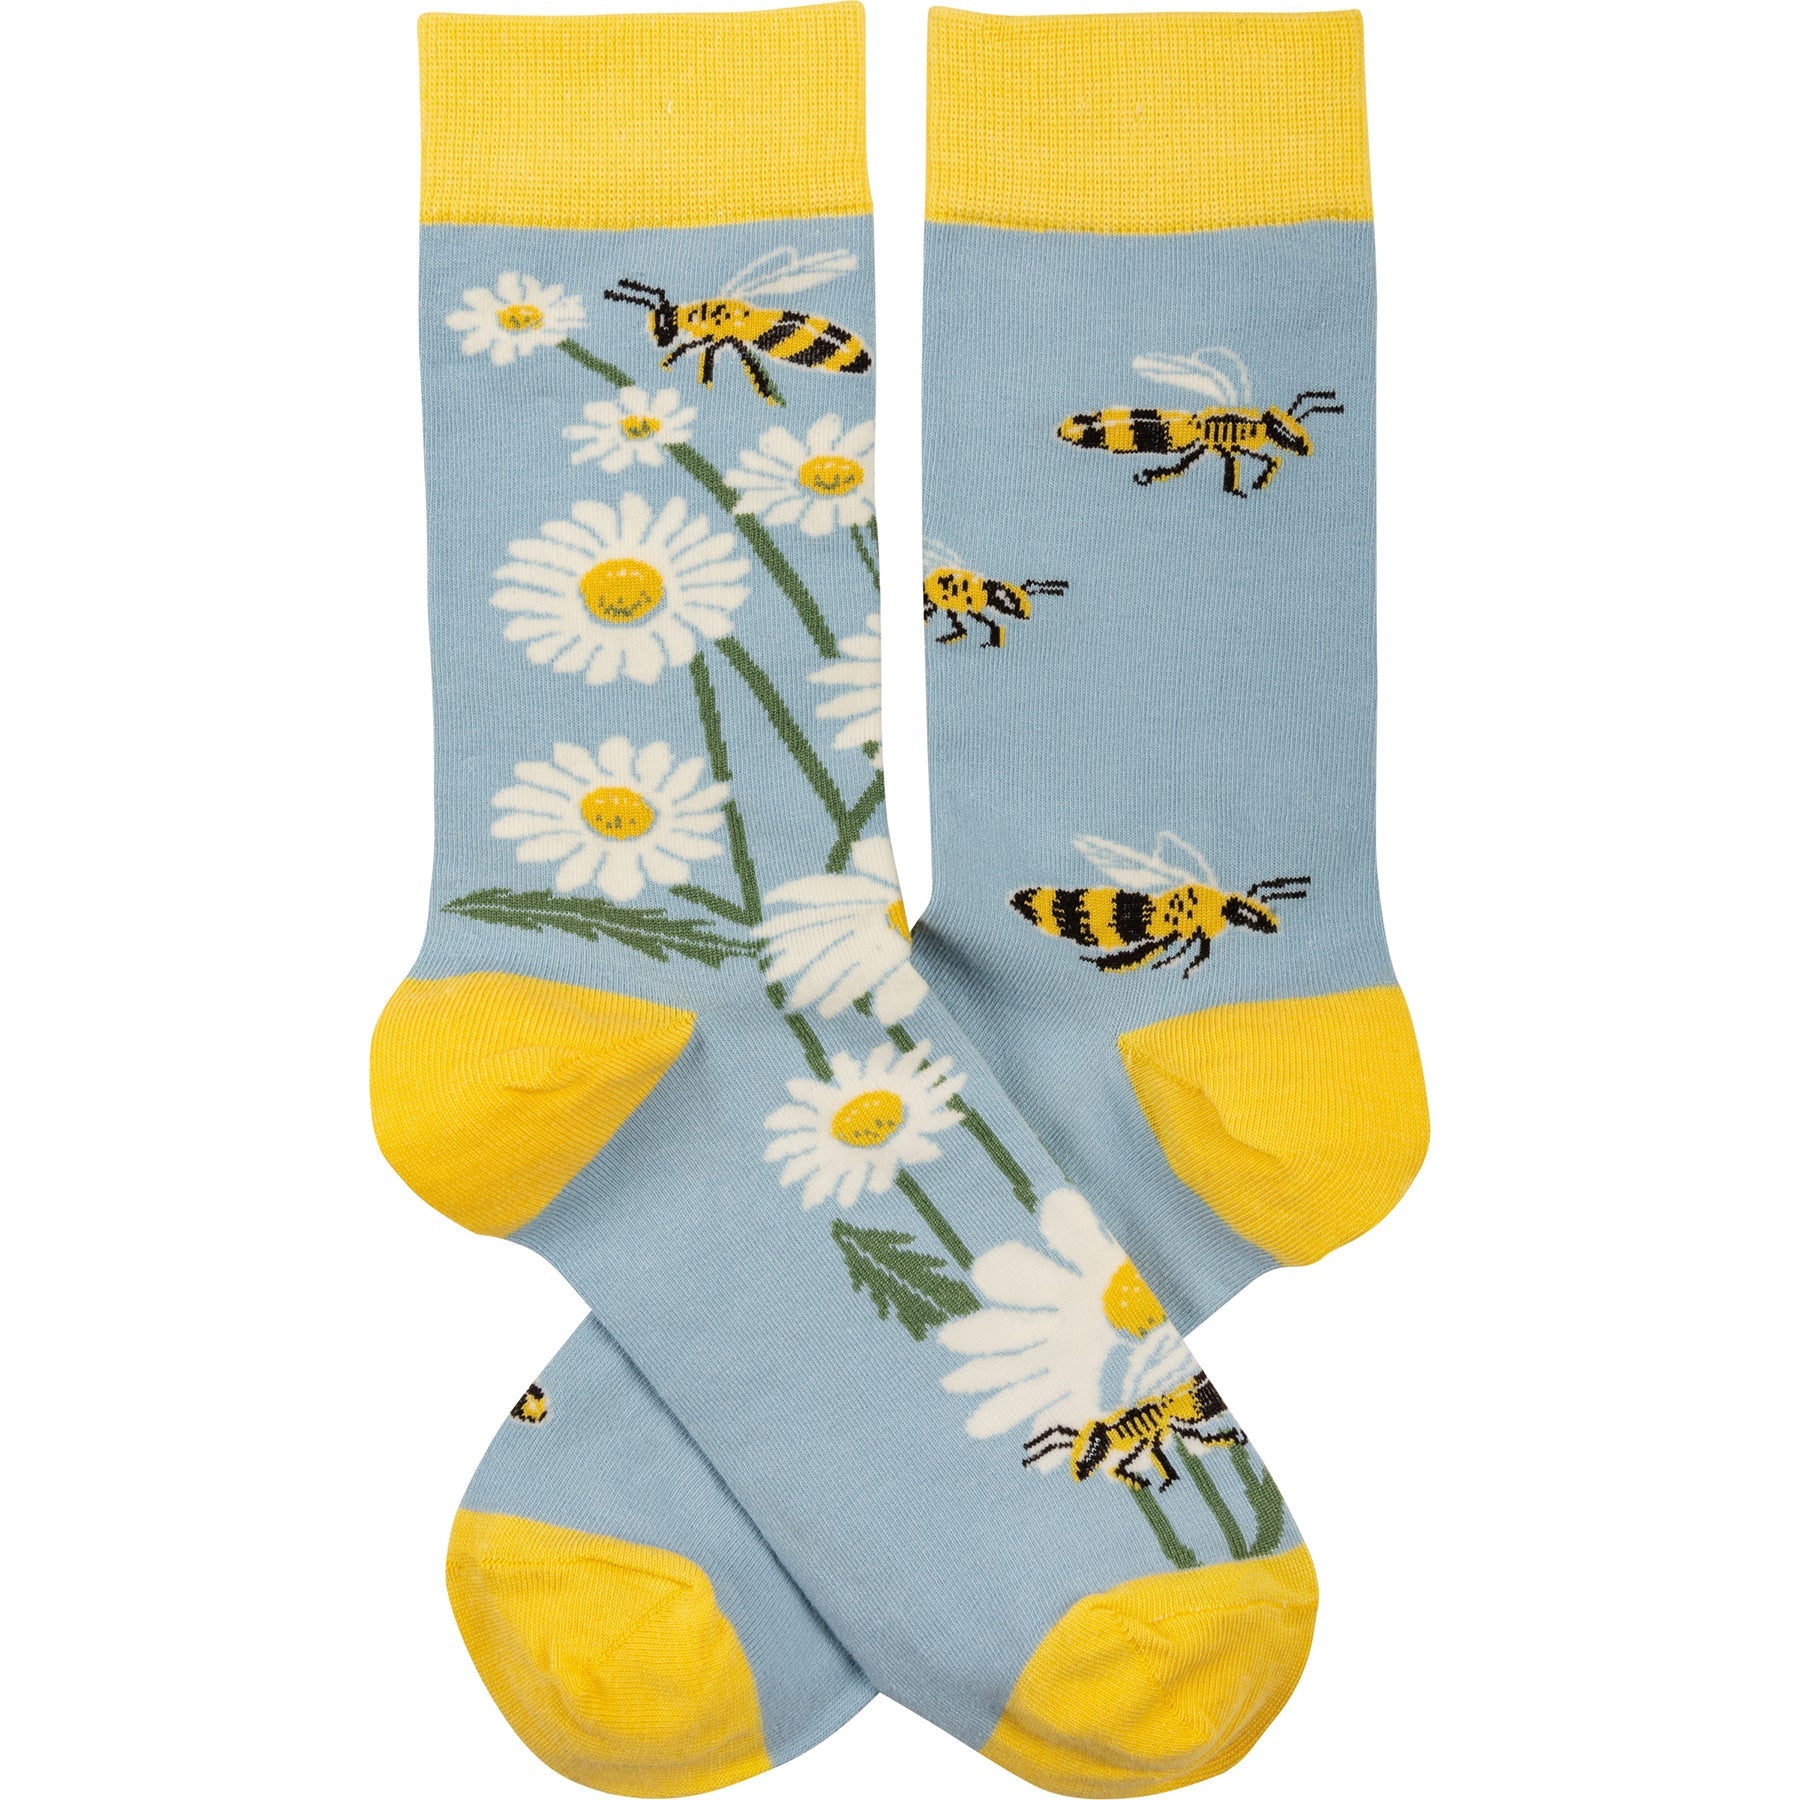 Bee Happy Coffee Tumbler and Socks Gift Set - The Kindness Cause Cool Stores Near Me